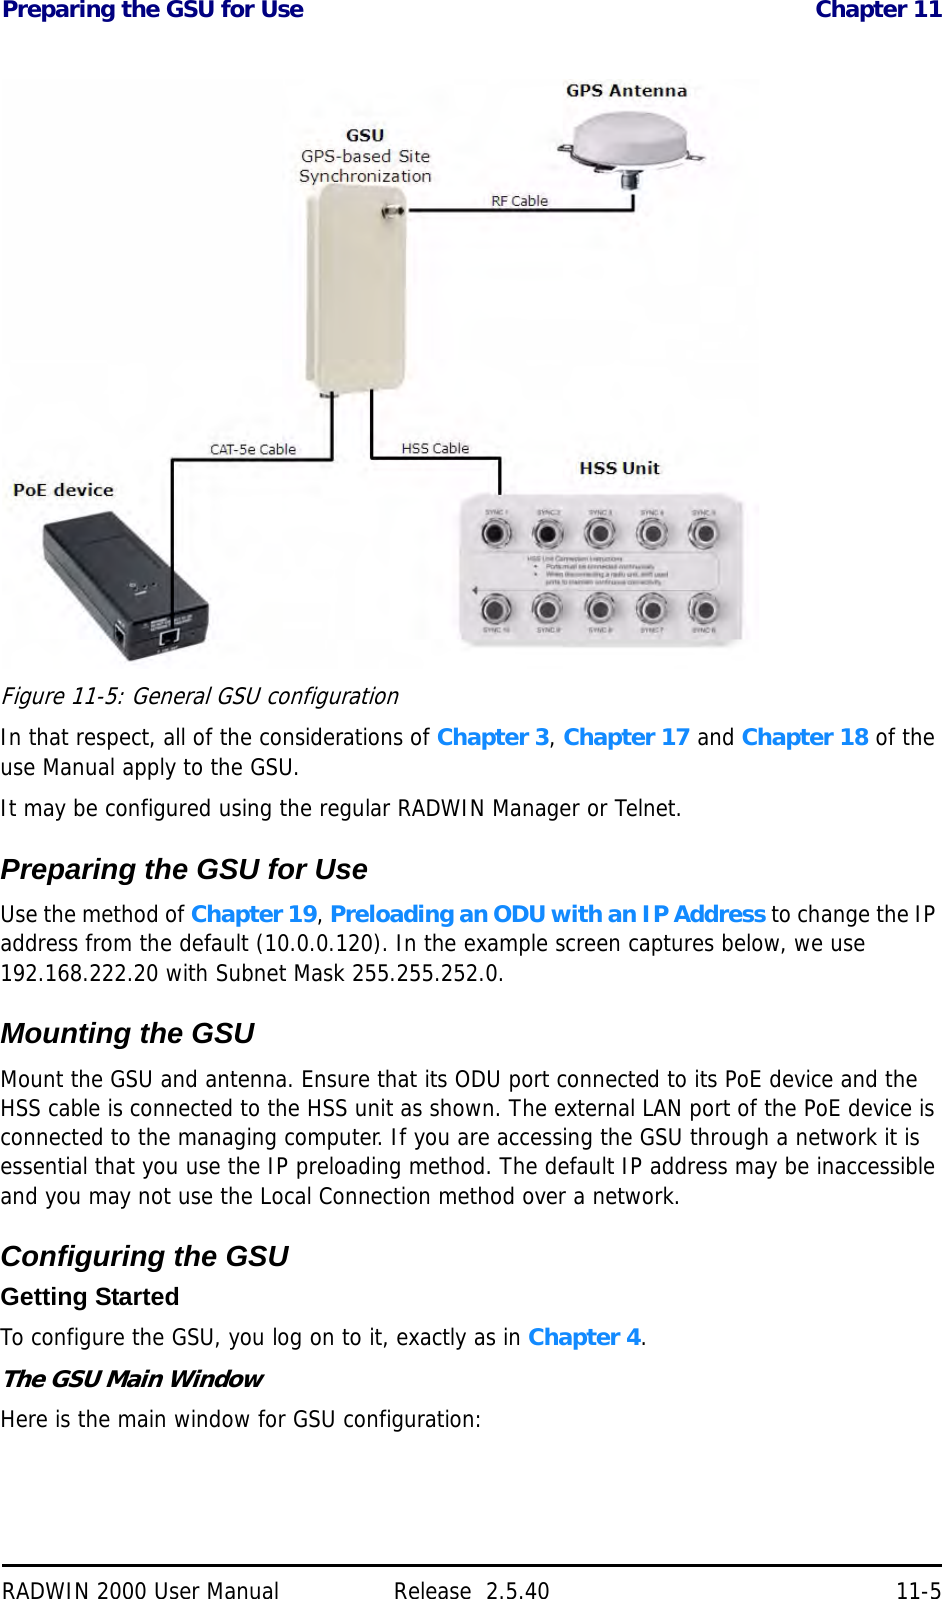 Preparing the GSU for Use Chapter 11RADWIN 2000 User Manual Release  2.5.40 11-5Figure 11-5: General GSU configurationIn that respect, all of the considerations of Chapter 3, Chapter 17 and Chapter 18 of the use Manual apply to the GSU.It may be configured using the regular RADWIN Manager or Telnet.Preparing the GSU for UseUse the method of Chapter 19, Preloading an ODU with an IP Address to change the IP address from the default (10.0.0.120). In the example screen captures below, we use 192.168.222.20 with Subnet Mask 255.255.252.0.Mounting the GSUMount the GSU and antenna. Ensure that its ODU port connected to its PoE device and the HSS cable is connected to the HSS unit as shown. The external LAN port of the PoE device is connected to the managing computer. If you are accessing the GSU through a network it is essential that you use the IP preloading method. The default IP address may be inaccessible and you may not use the Local Connection method over a network.Configuring the GSUGetting StartedTo configure the GSU, you log on to it, exactly as in Chapter 4.The GSU Main WindowHere is the main window for GSU configuration: